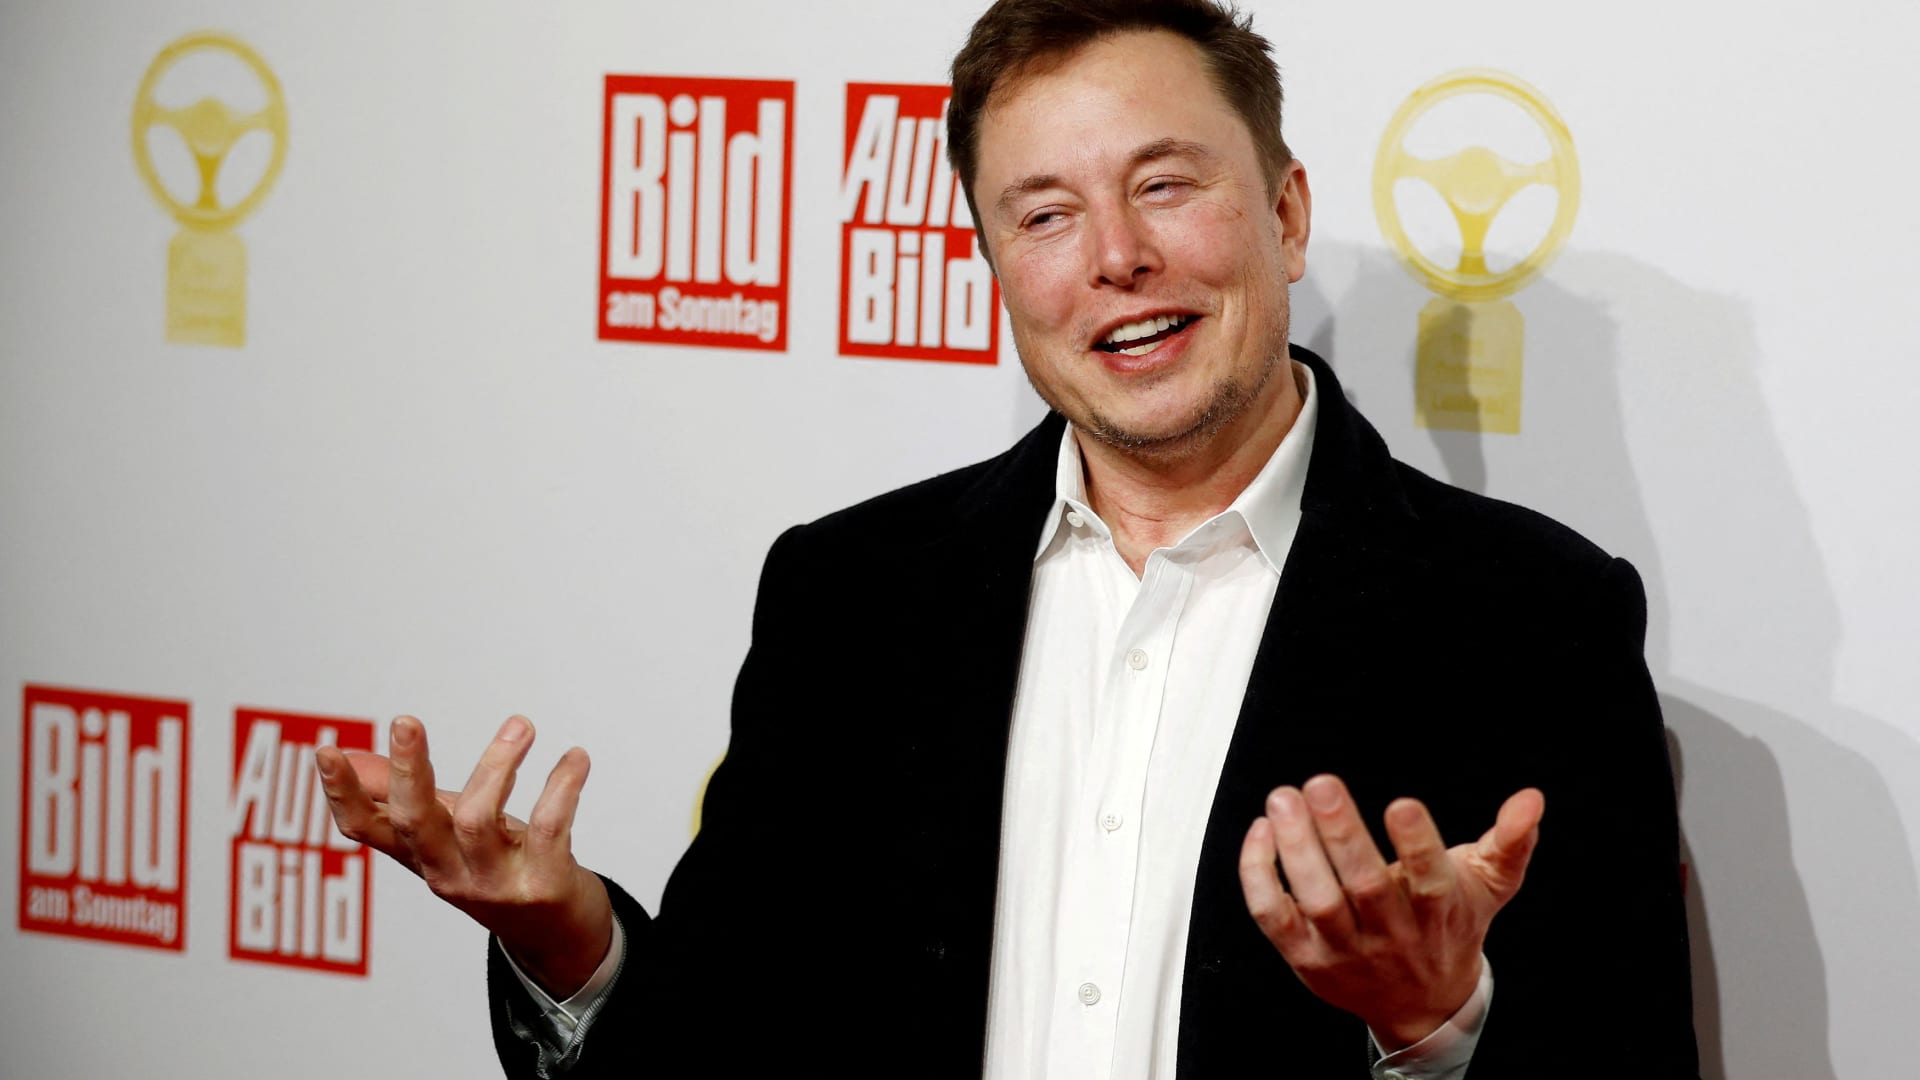 Twitter owner Elon Musk sees pressure from civil rights leaders